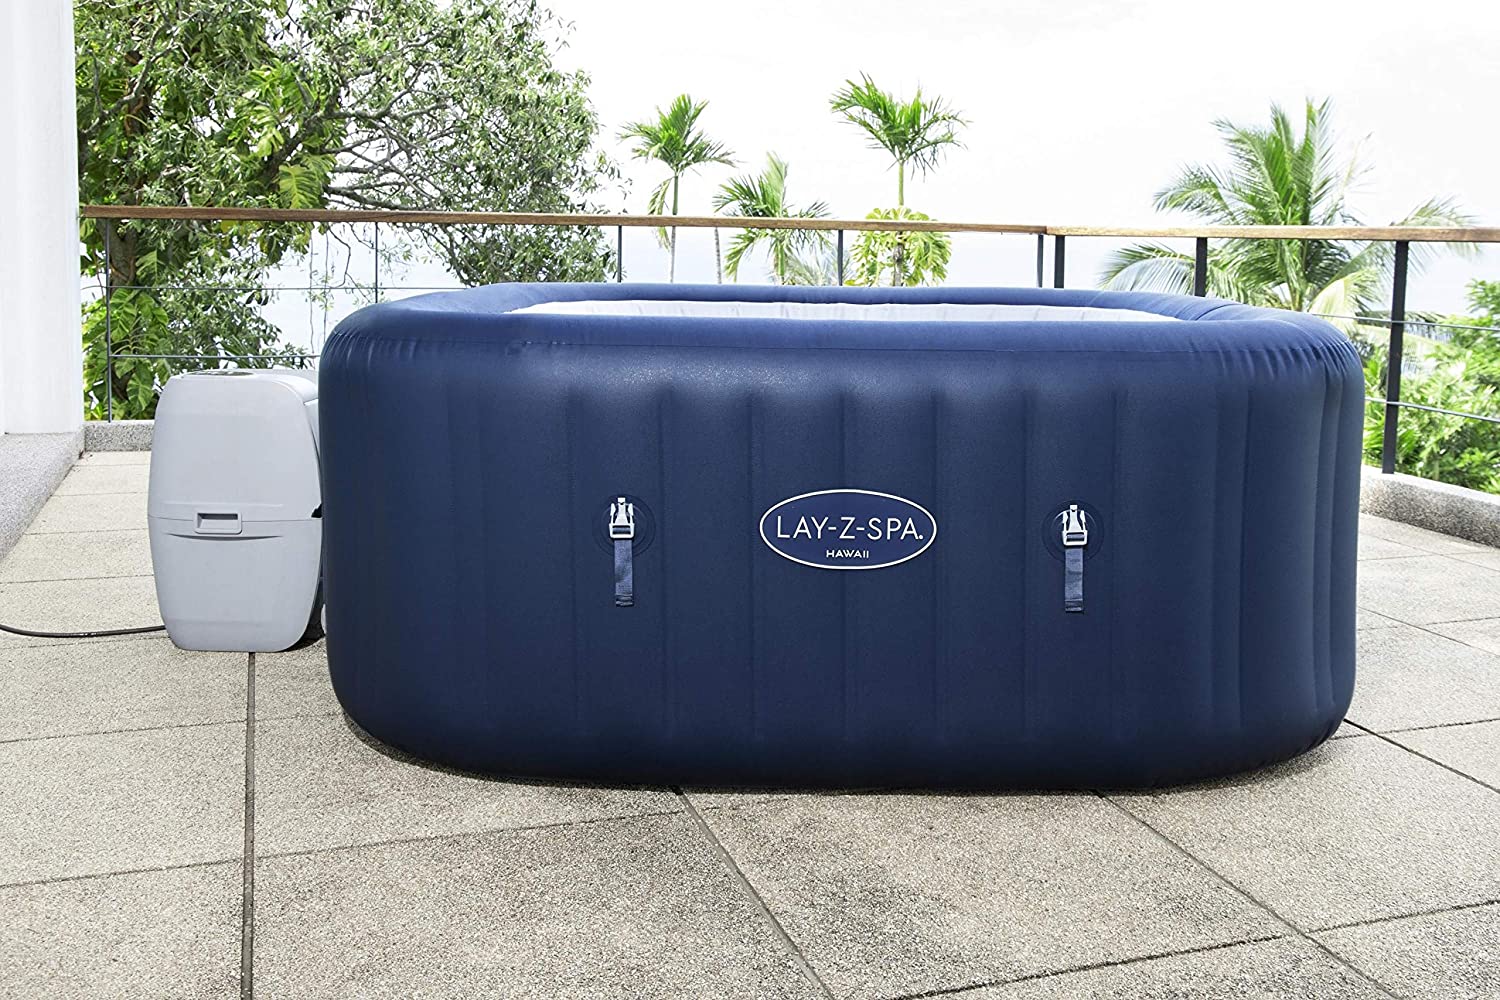 Spa Inflable Bestway Lay-Z-Spa Hawaii Airjet